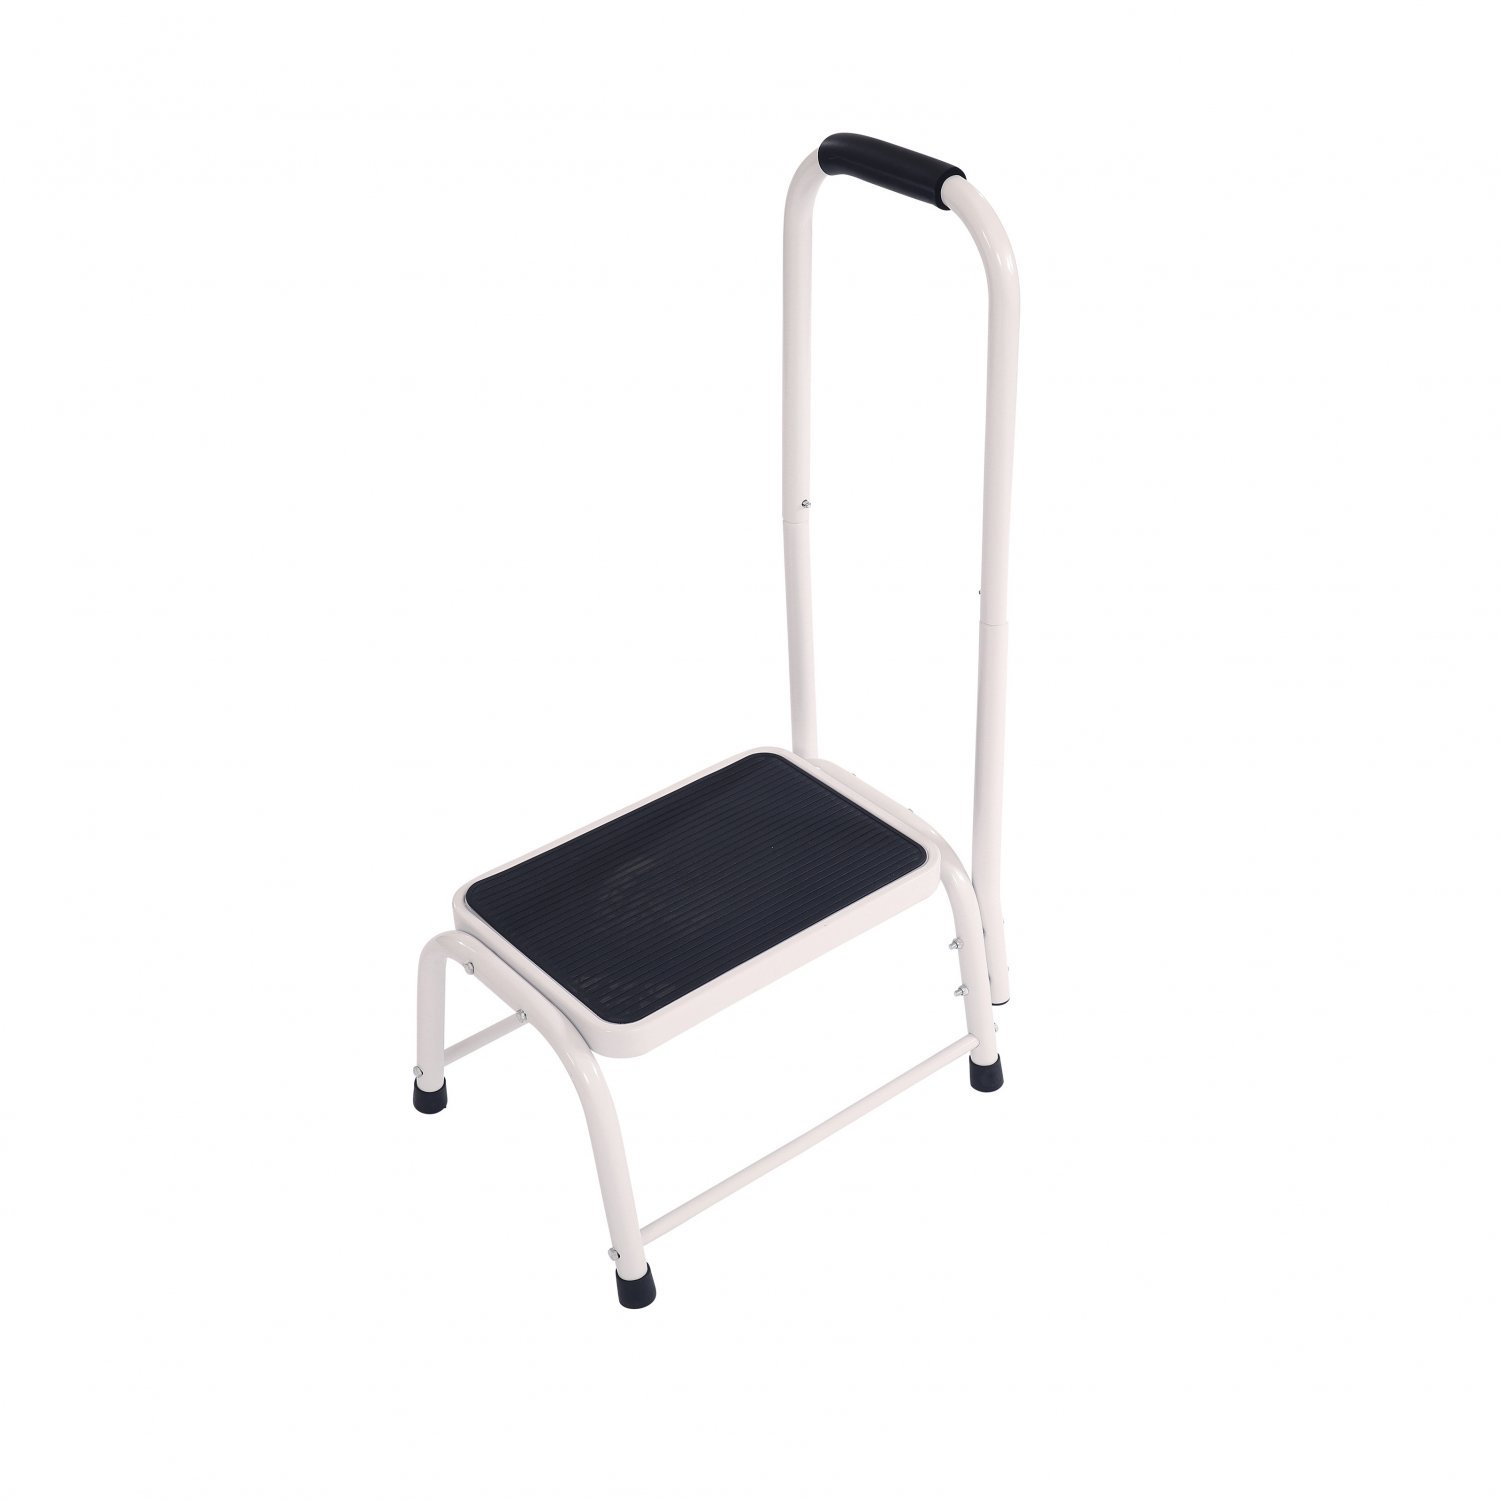 Single Caravan Step Stool Steel Non Slip Rubber Tread Safety with Handle